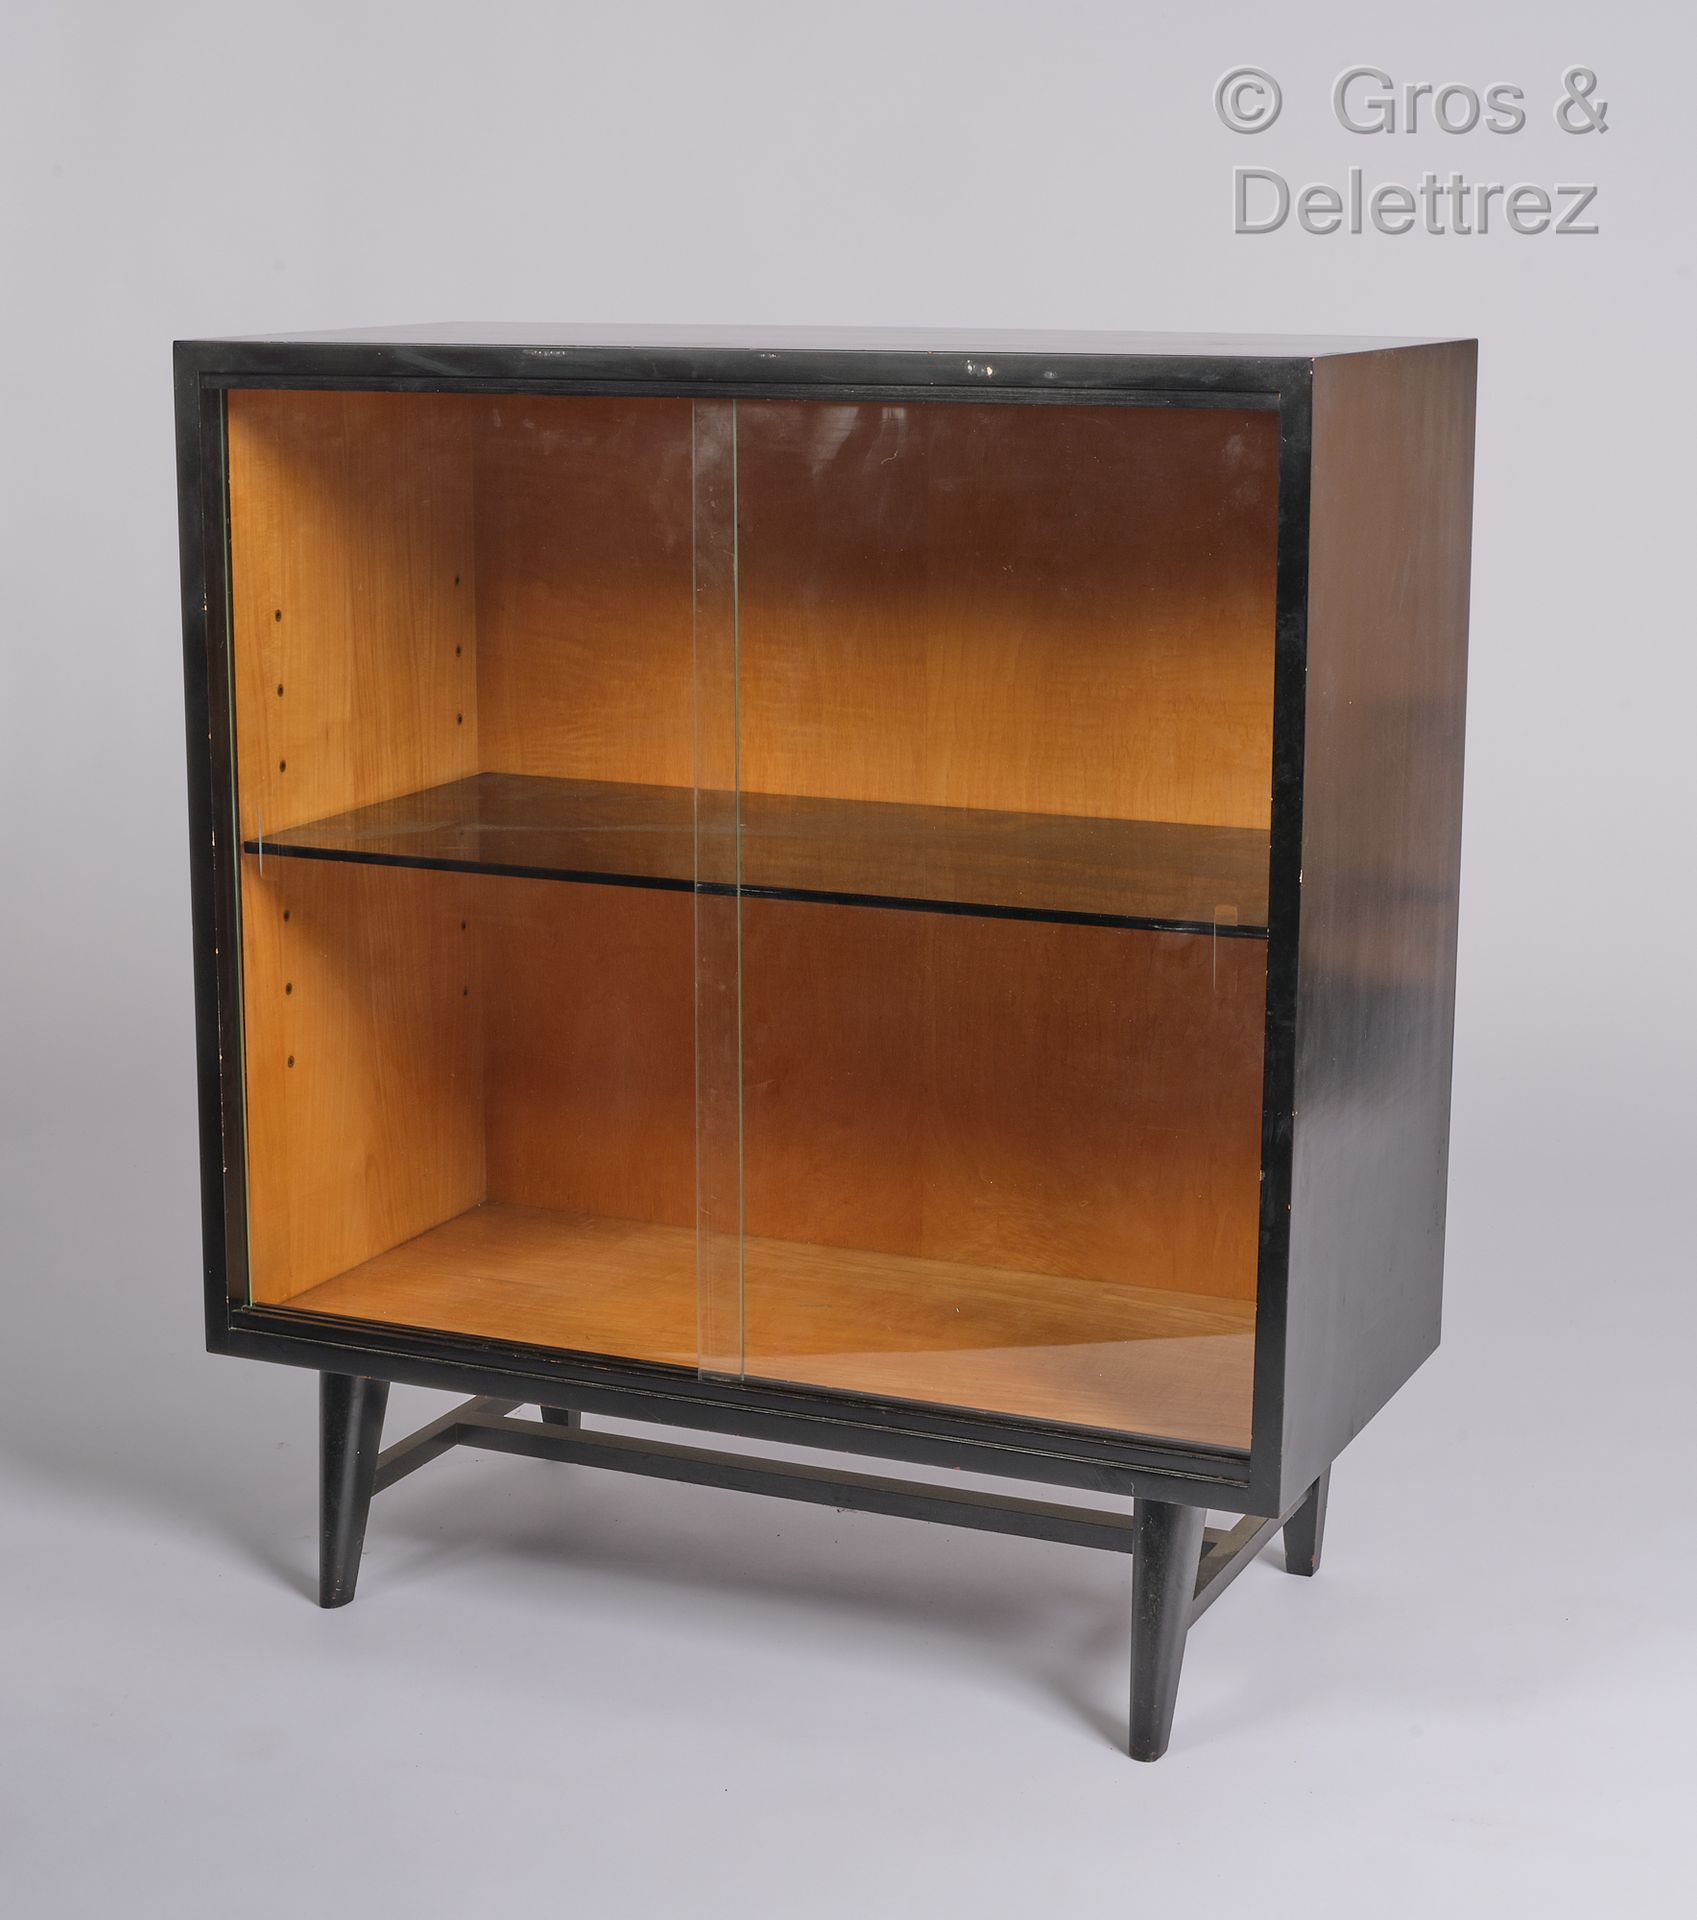 Null Maurice FLACHET (1872-1964)

Display cabinet in black lacquered wood openin&hellip;